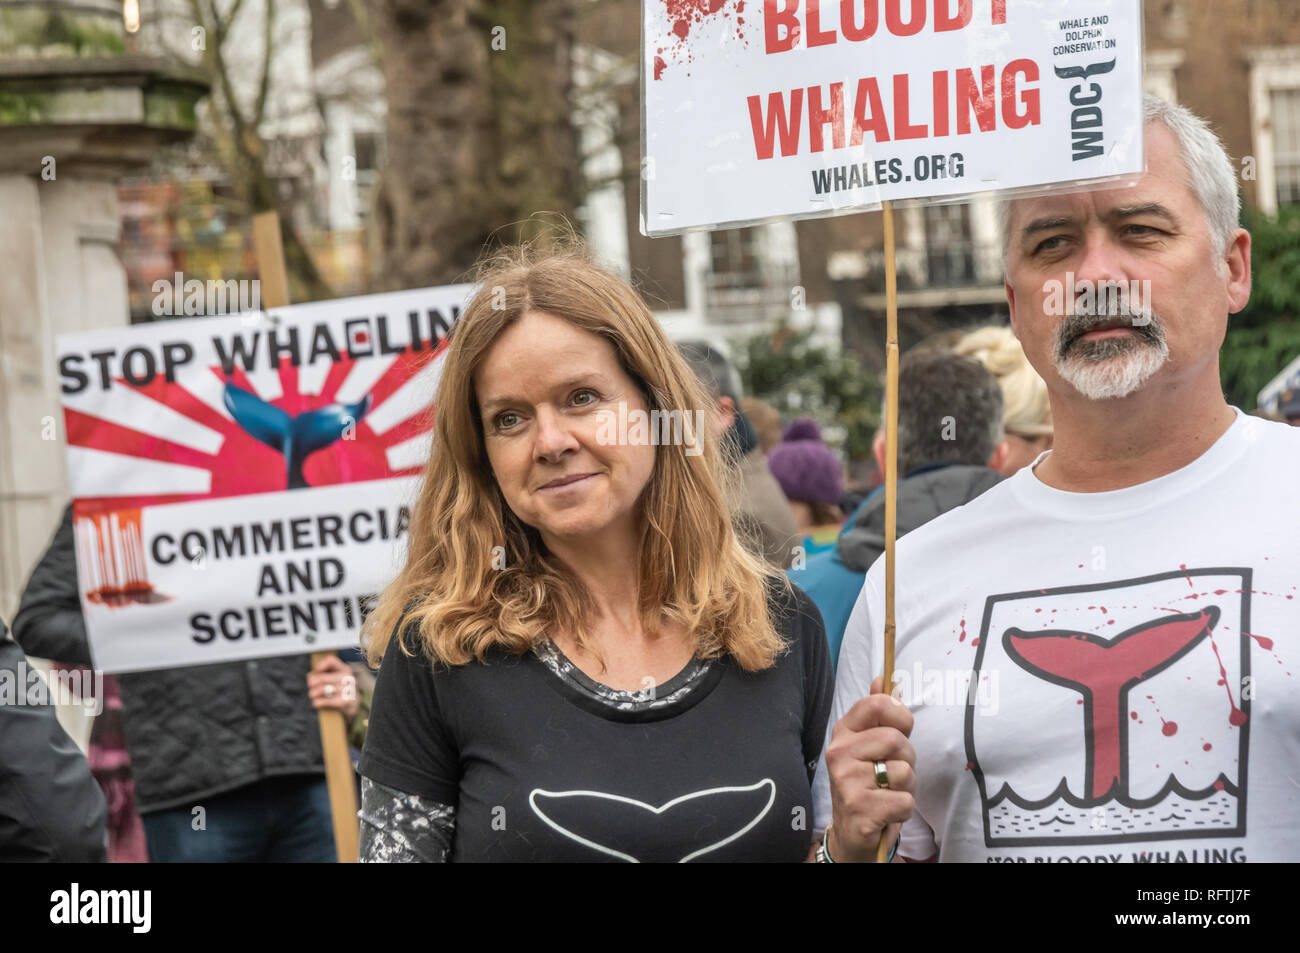 London, UK. 26th January 2019. A rally in Cavendish Square opposed the Japanese government's decision to  withdraw from the International Whaling Commission (IWC) and resume commercial whaling in July 2019. This could result in many species of whales becoming under threat. Speakers included Dominic Dyer, Will Travers of Born Free, John Flack, MEP, Stanley Johnson and Boris's girlfriend Carrie Symonds, and a remarkable young girl Bella. The campaigners then marched to deliver a letter to the Japanese Embassy. Peter Marshall/Alamy Live News. Stock Photo